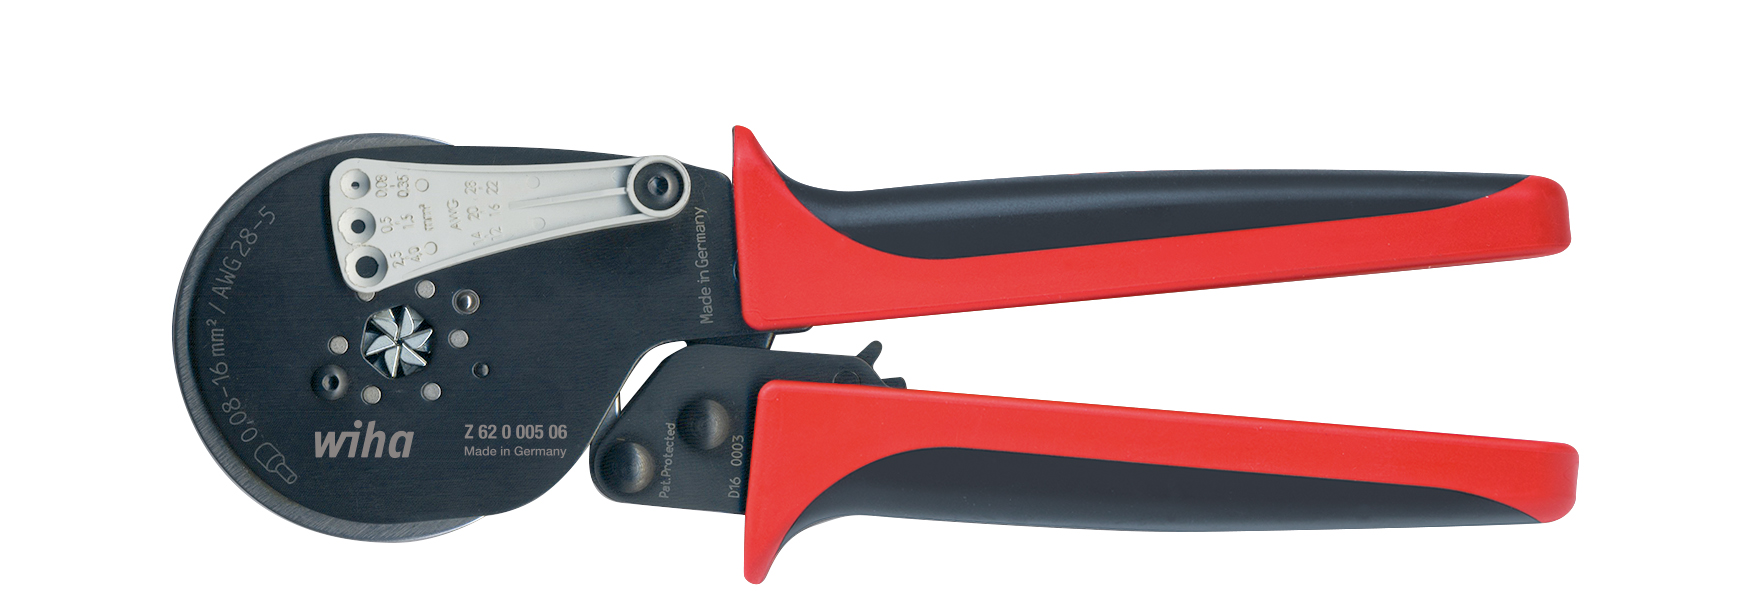 Wiha 32945 7-inch Insulated Industrial Crimping Pliers for sale online 